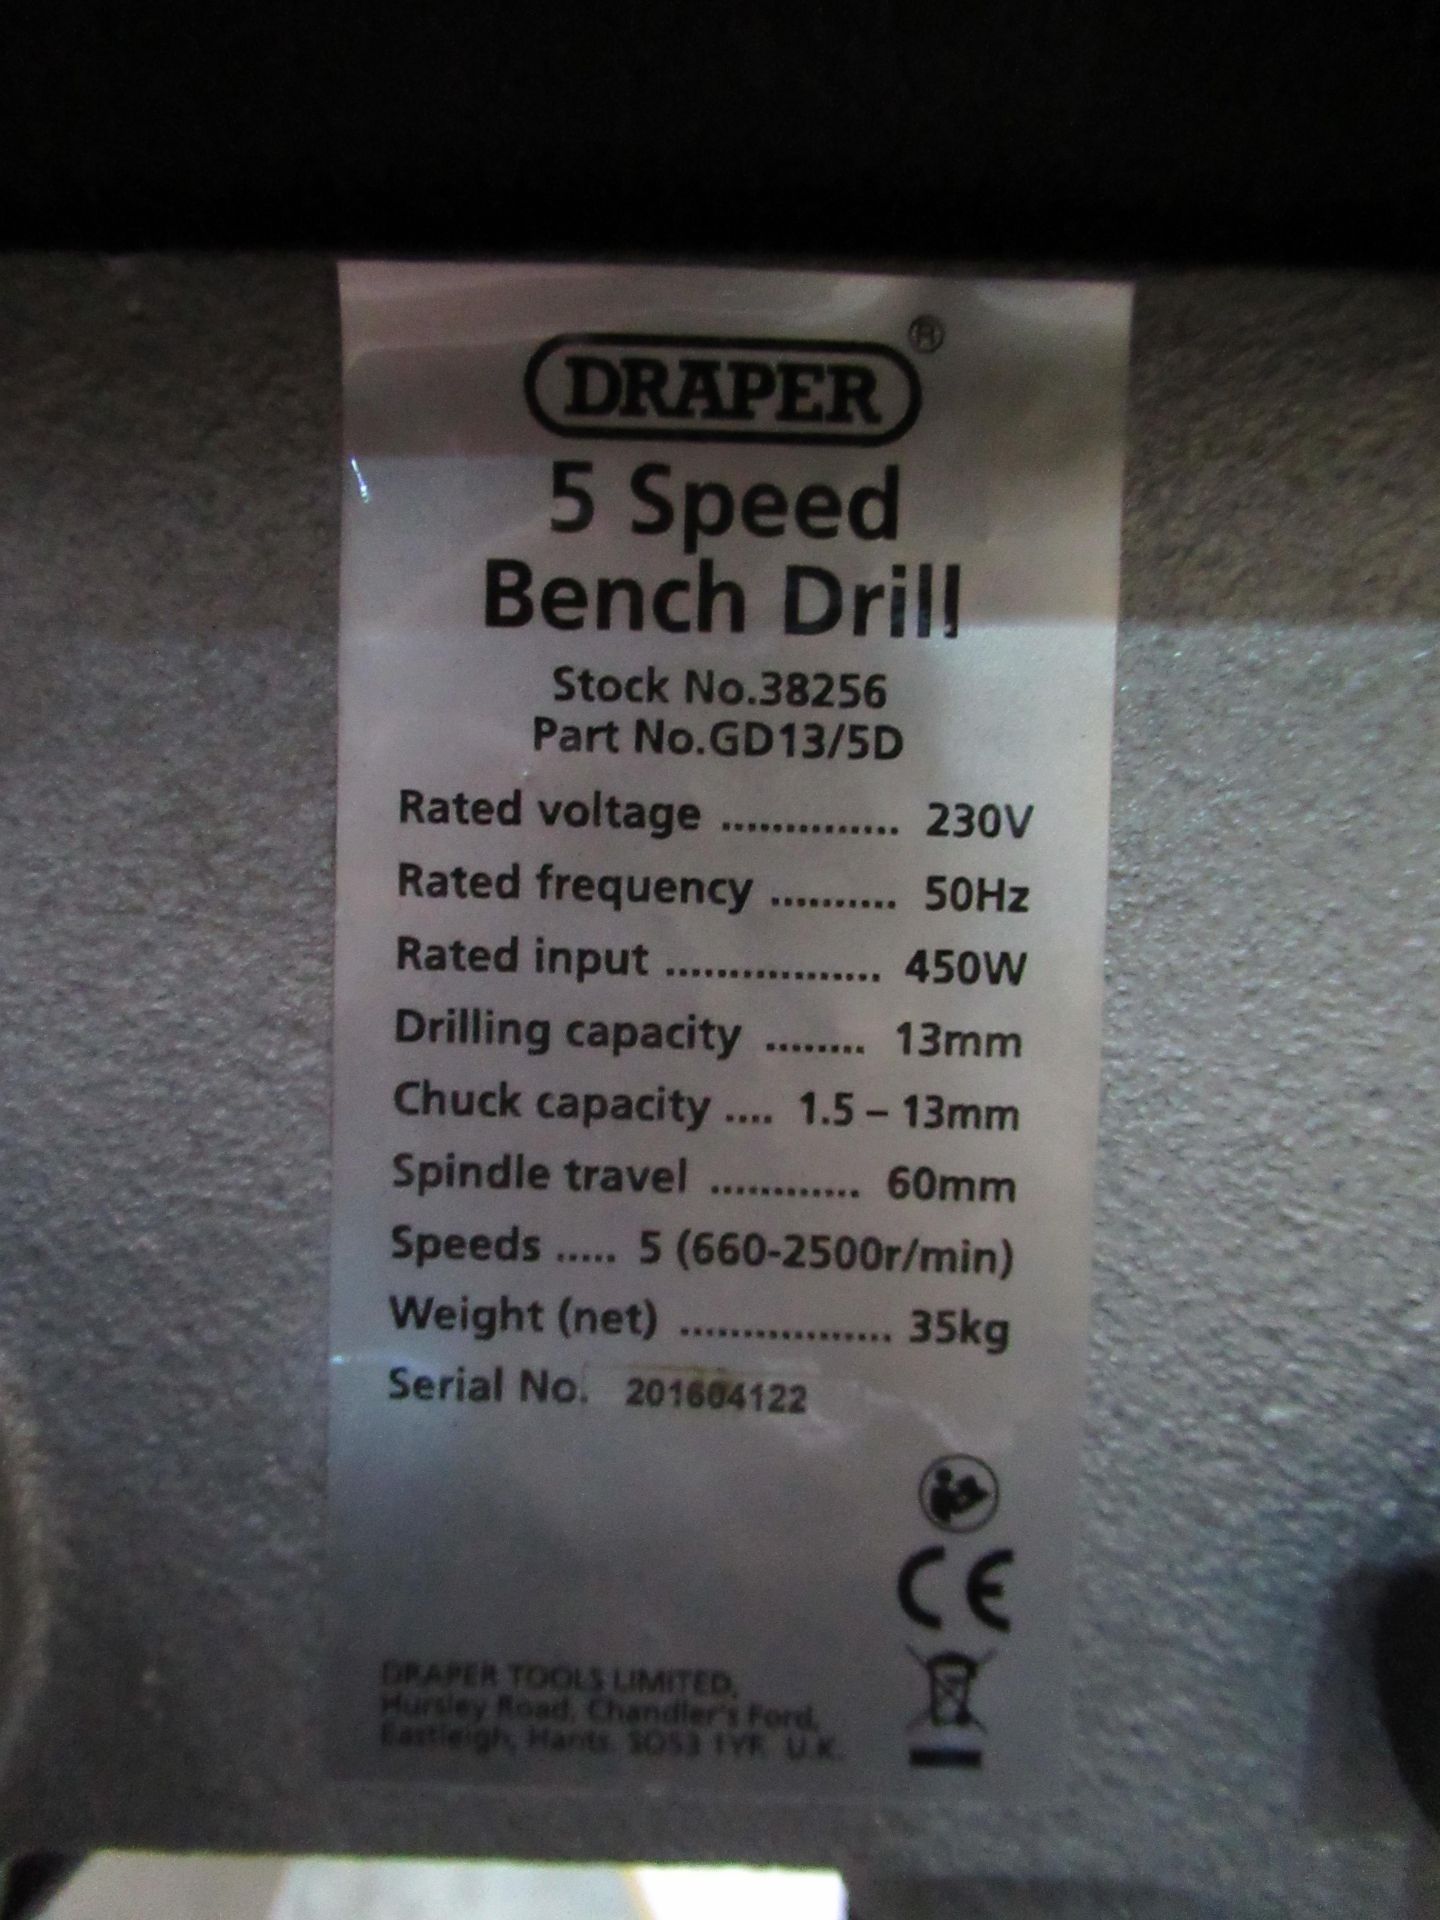 Draper Five Speed Bench Drill - Image 6 of 6